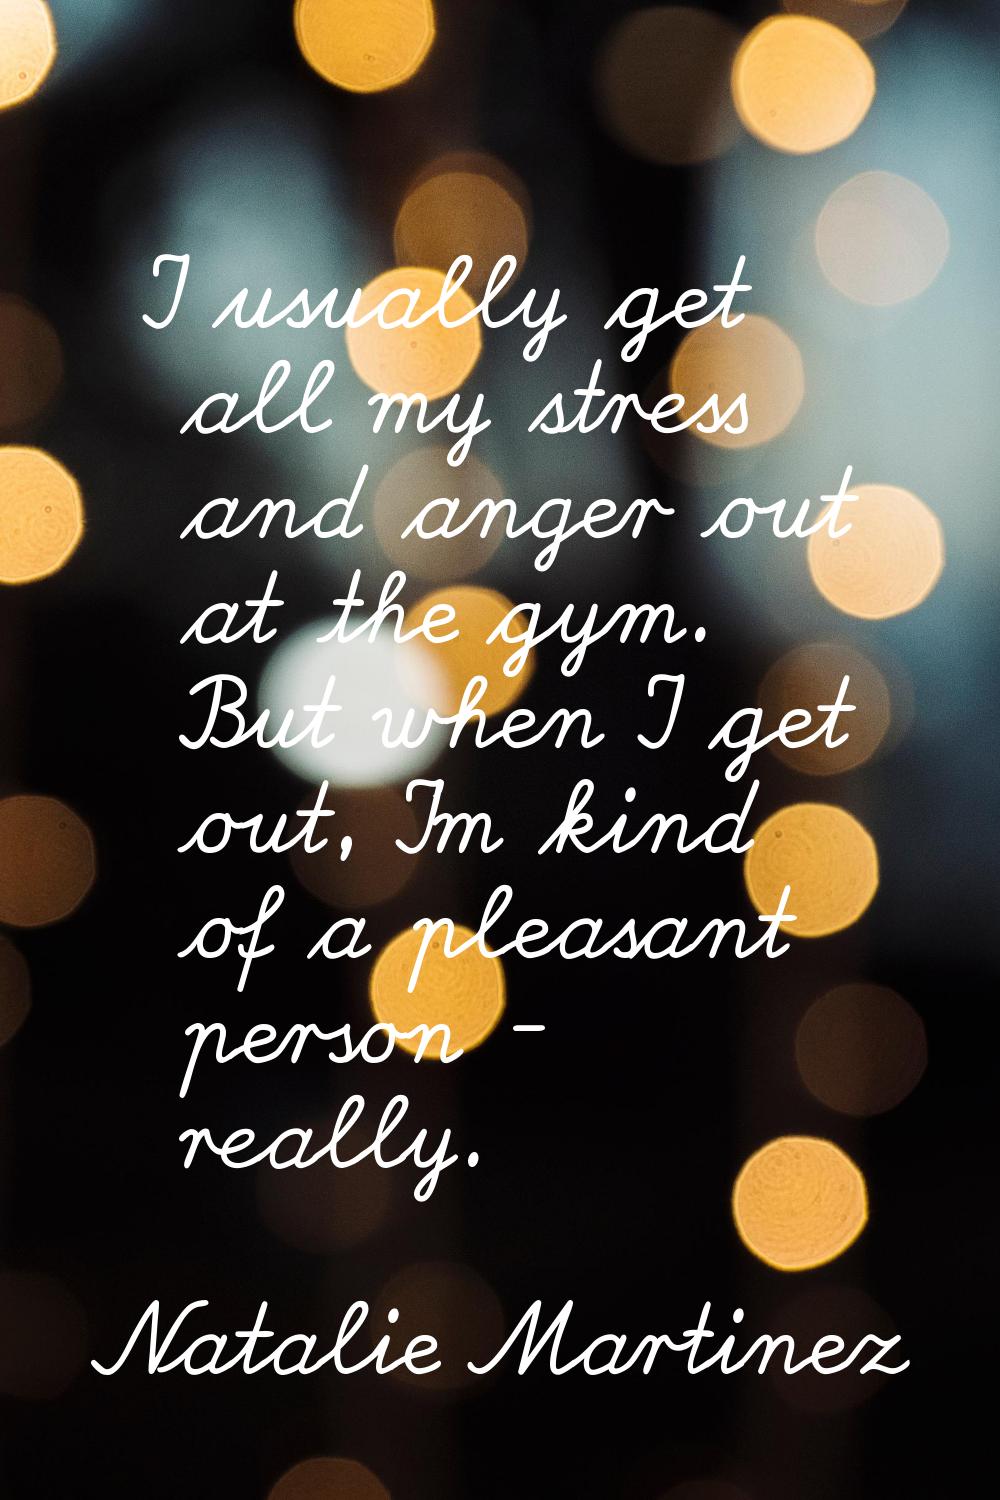 I usually get all my stress and anger out at the gym. But when I get out, I'm kind of a pleasant pe